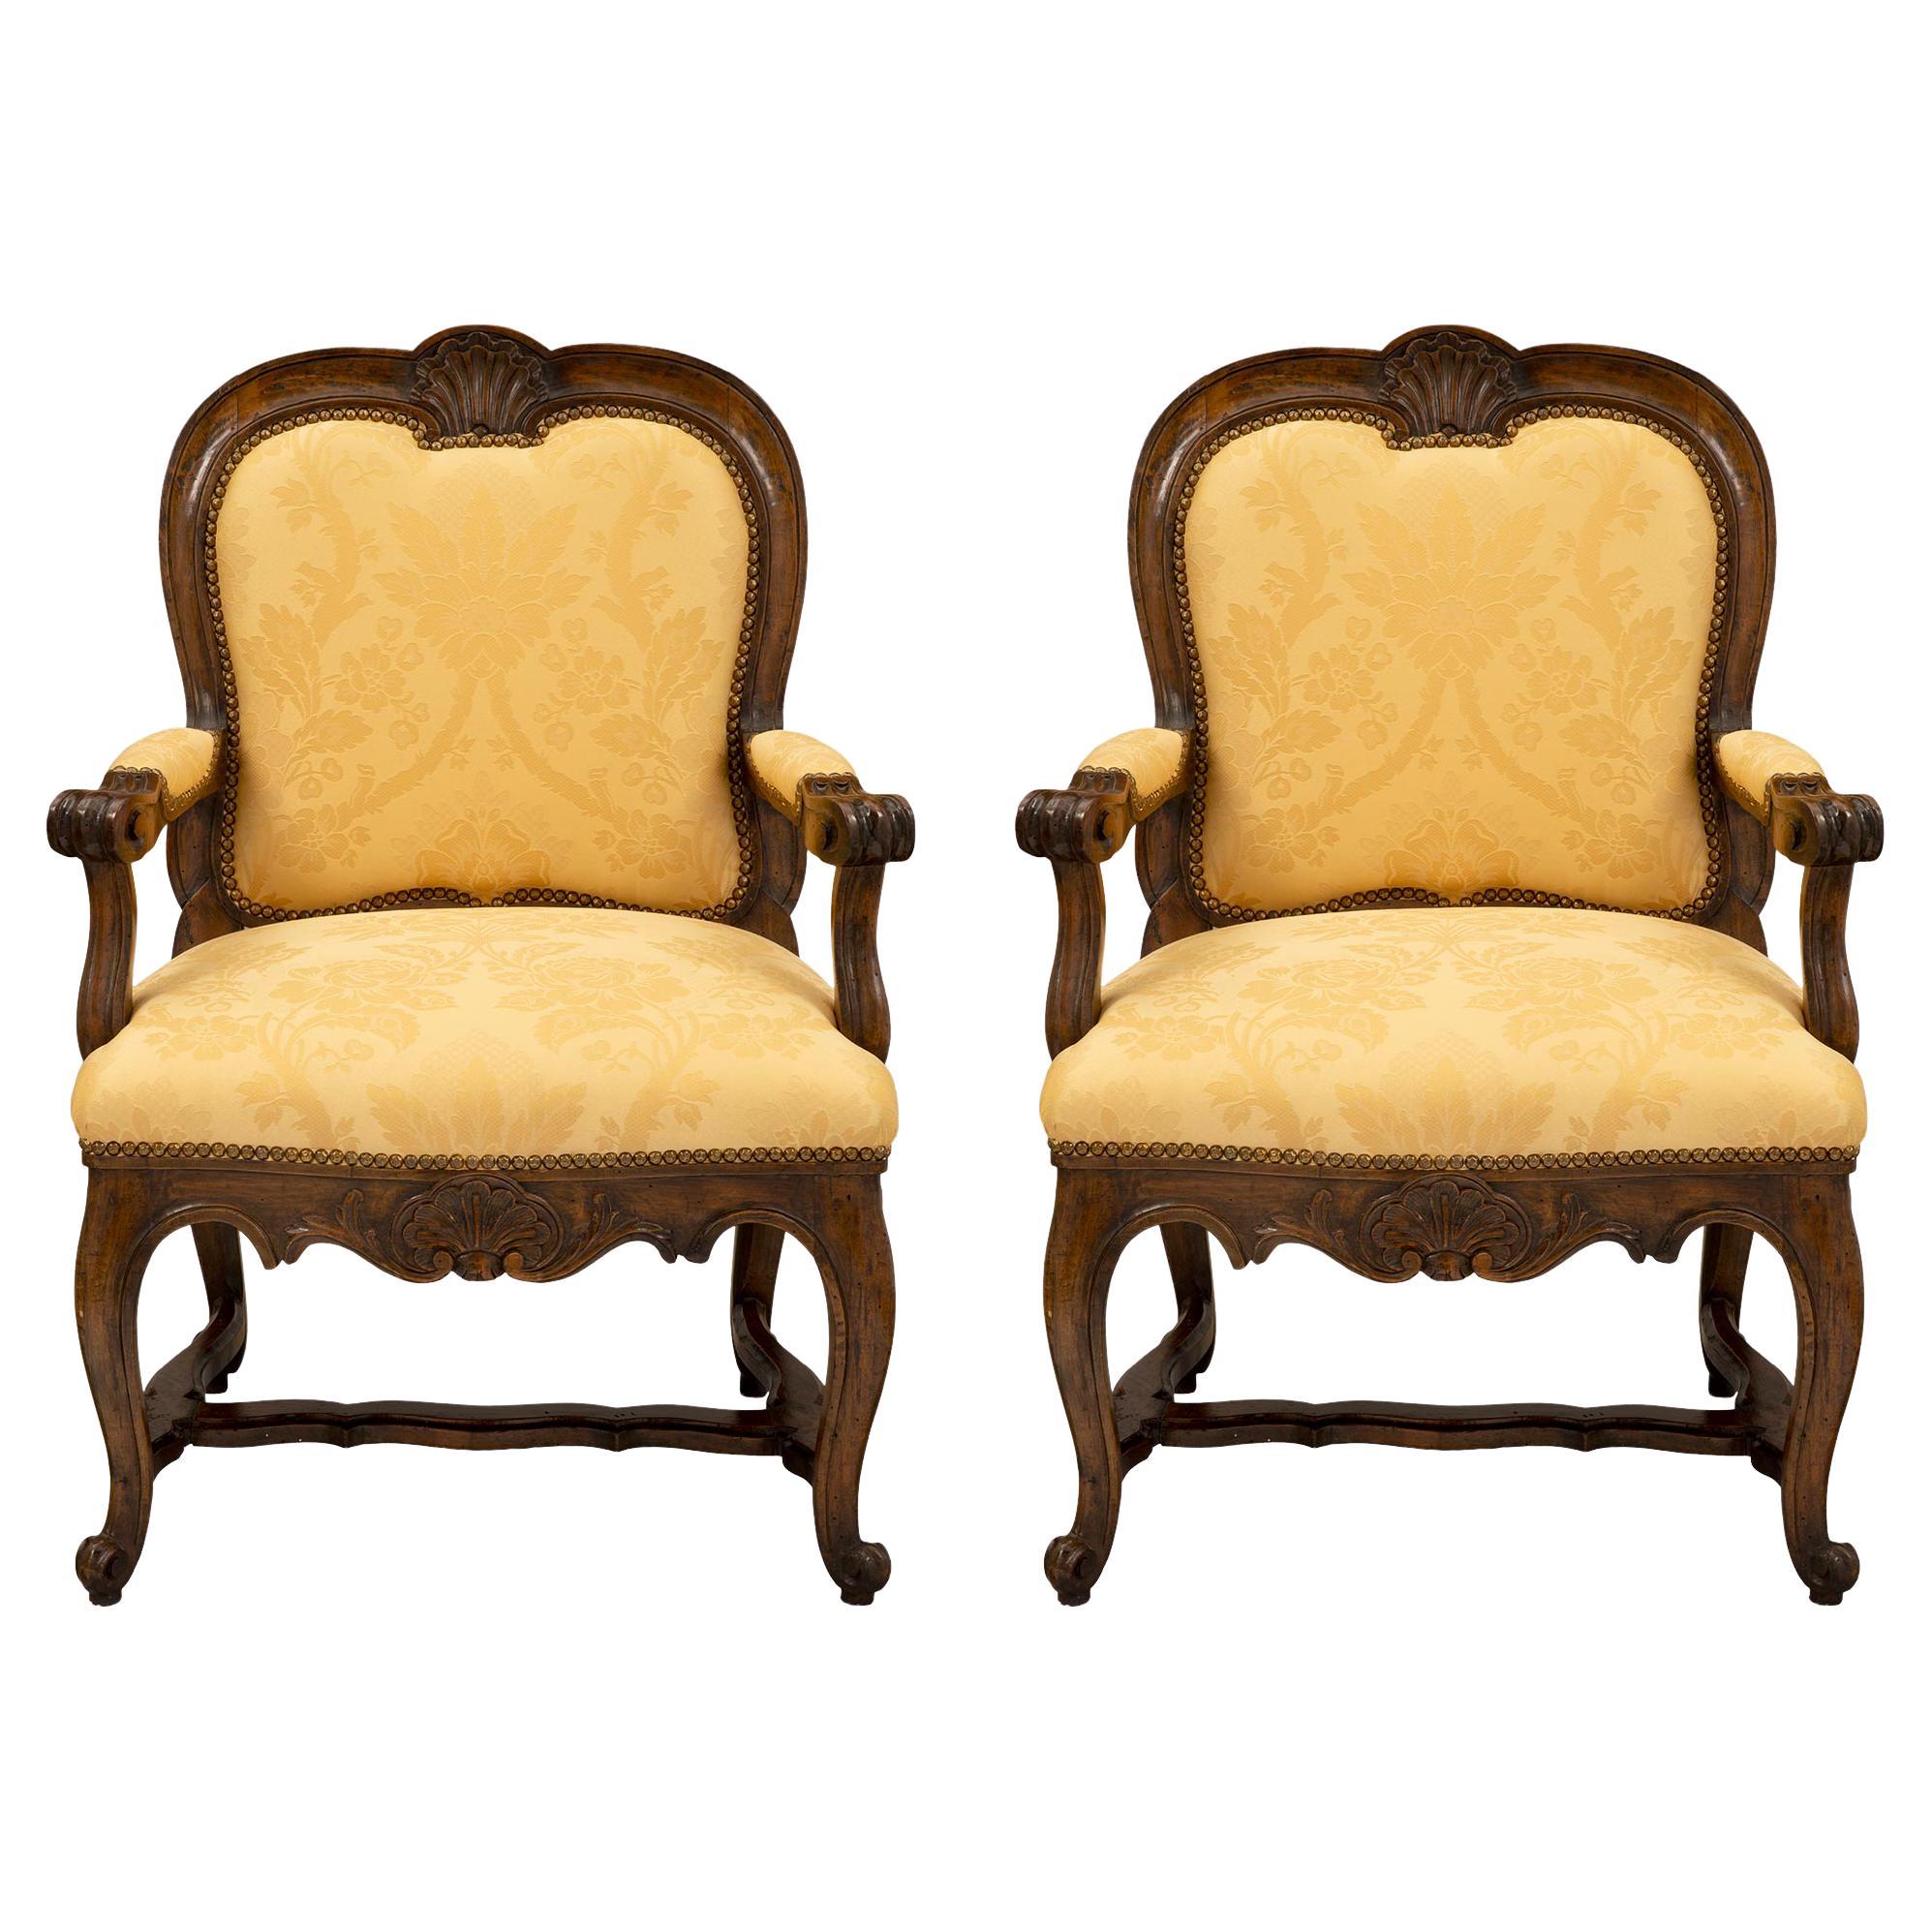 Pair of Carved Walnut 19th Century Italian Armchairs For Sale